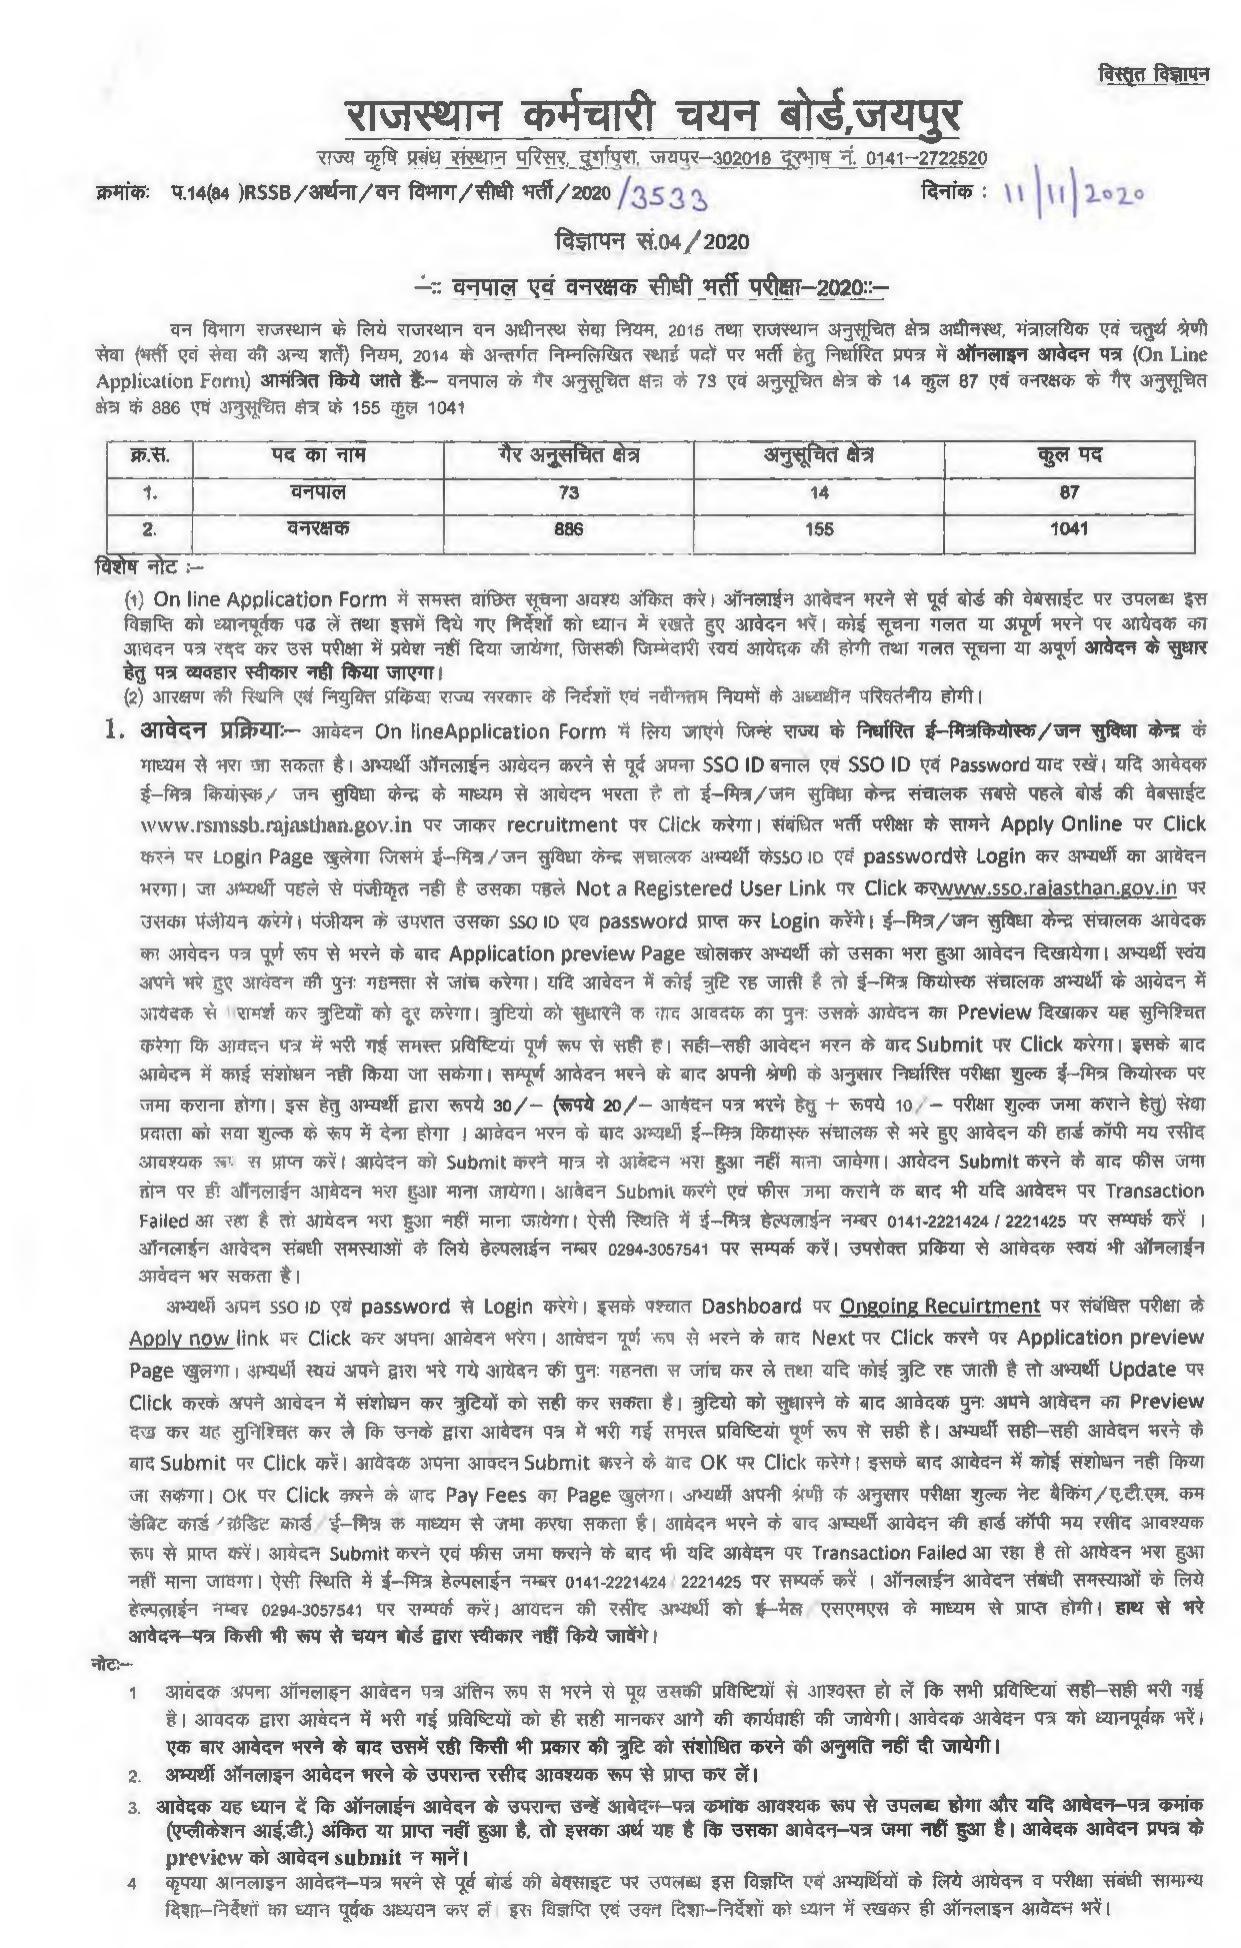 Download Notification – Advt. No. 04/2020 - Page 5